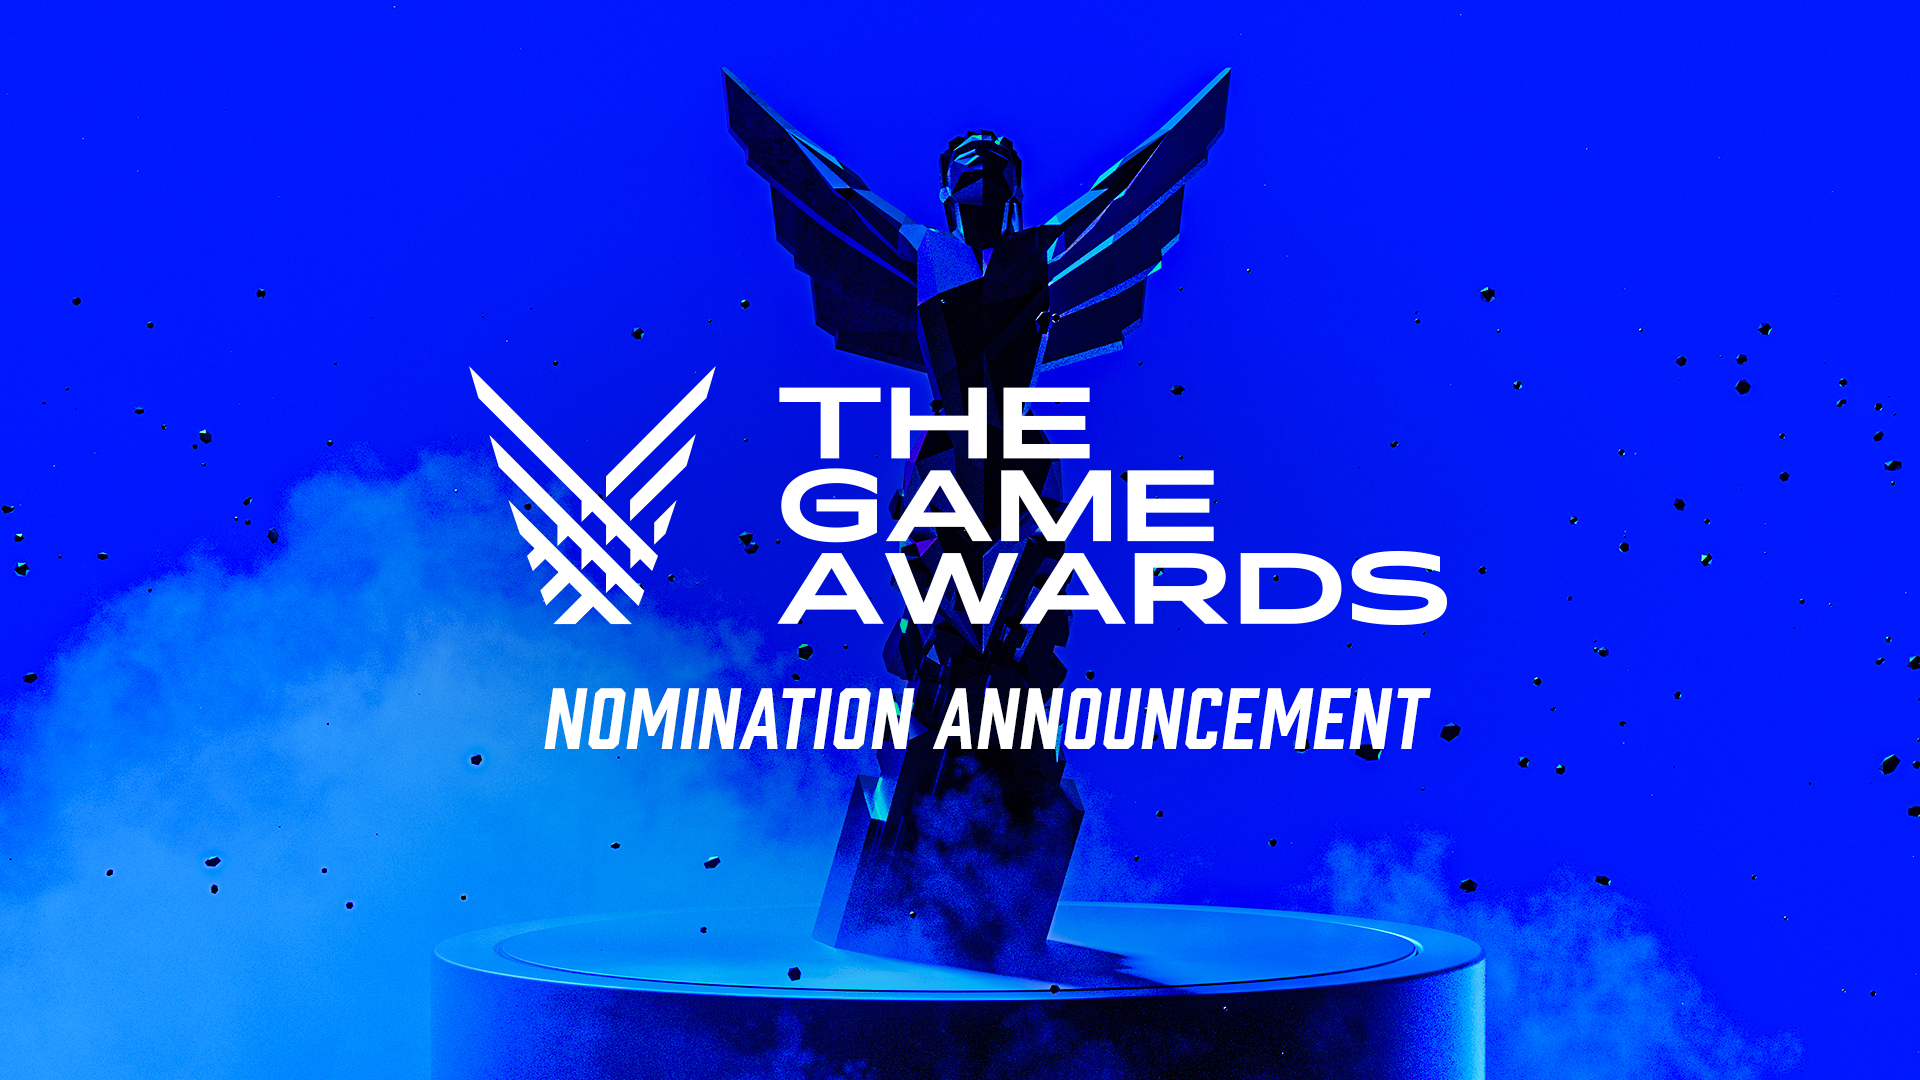 Hitman 3, Resident Evil 4 And More Make The Game Awards VR Nominations